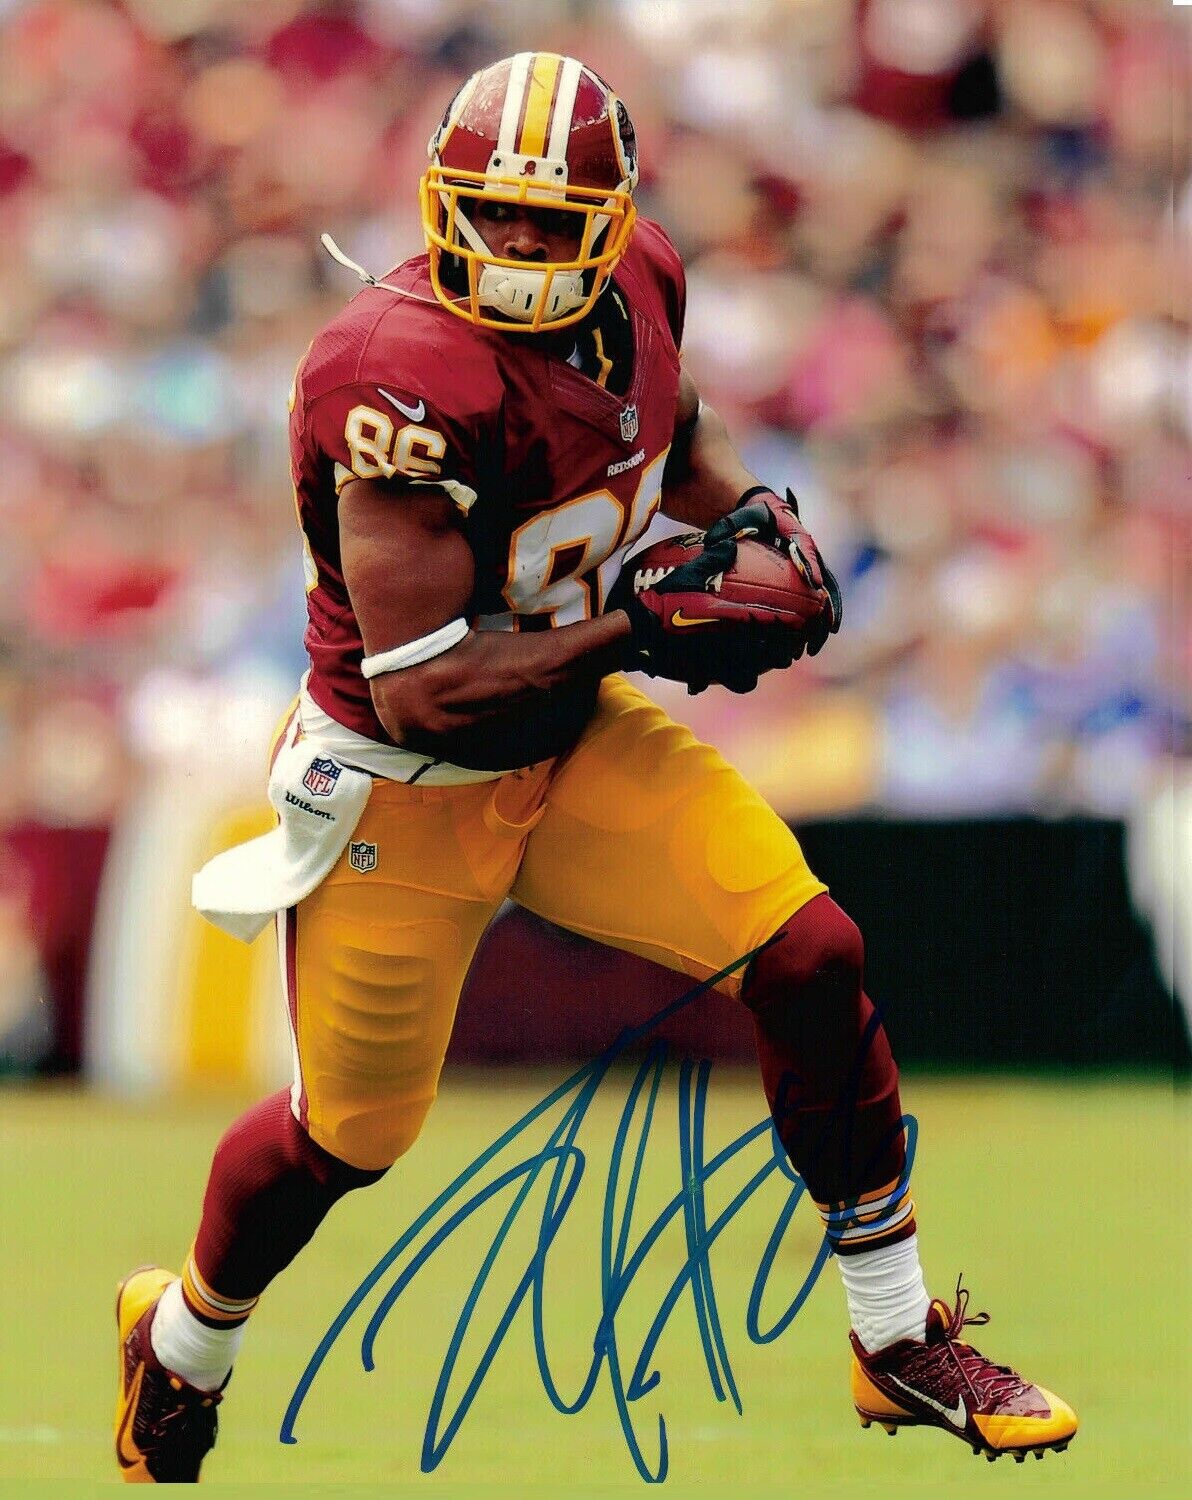 Jordan Reed Autographed Signed 8x10 Photo Poster painting ( Redskins ) REPRINT